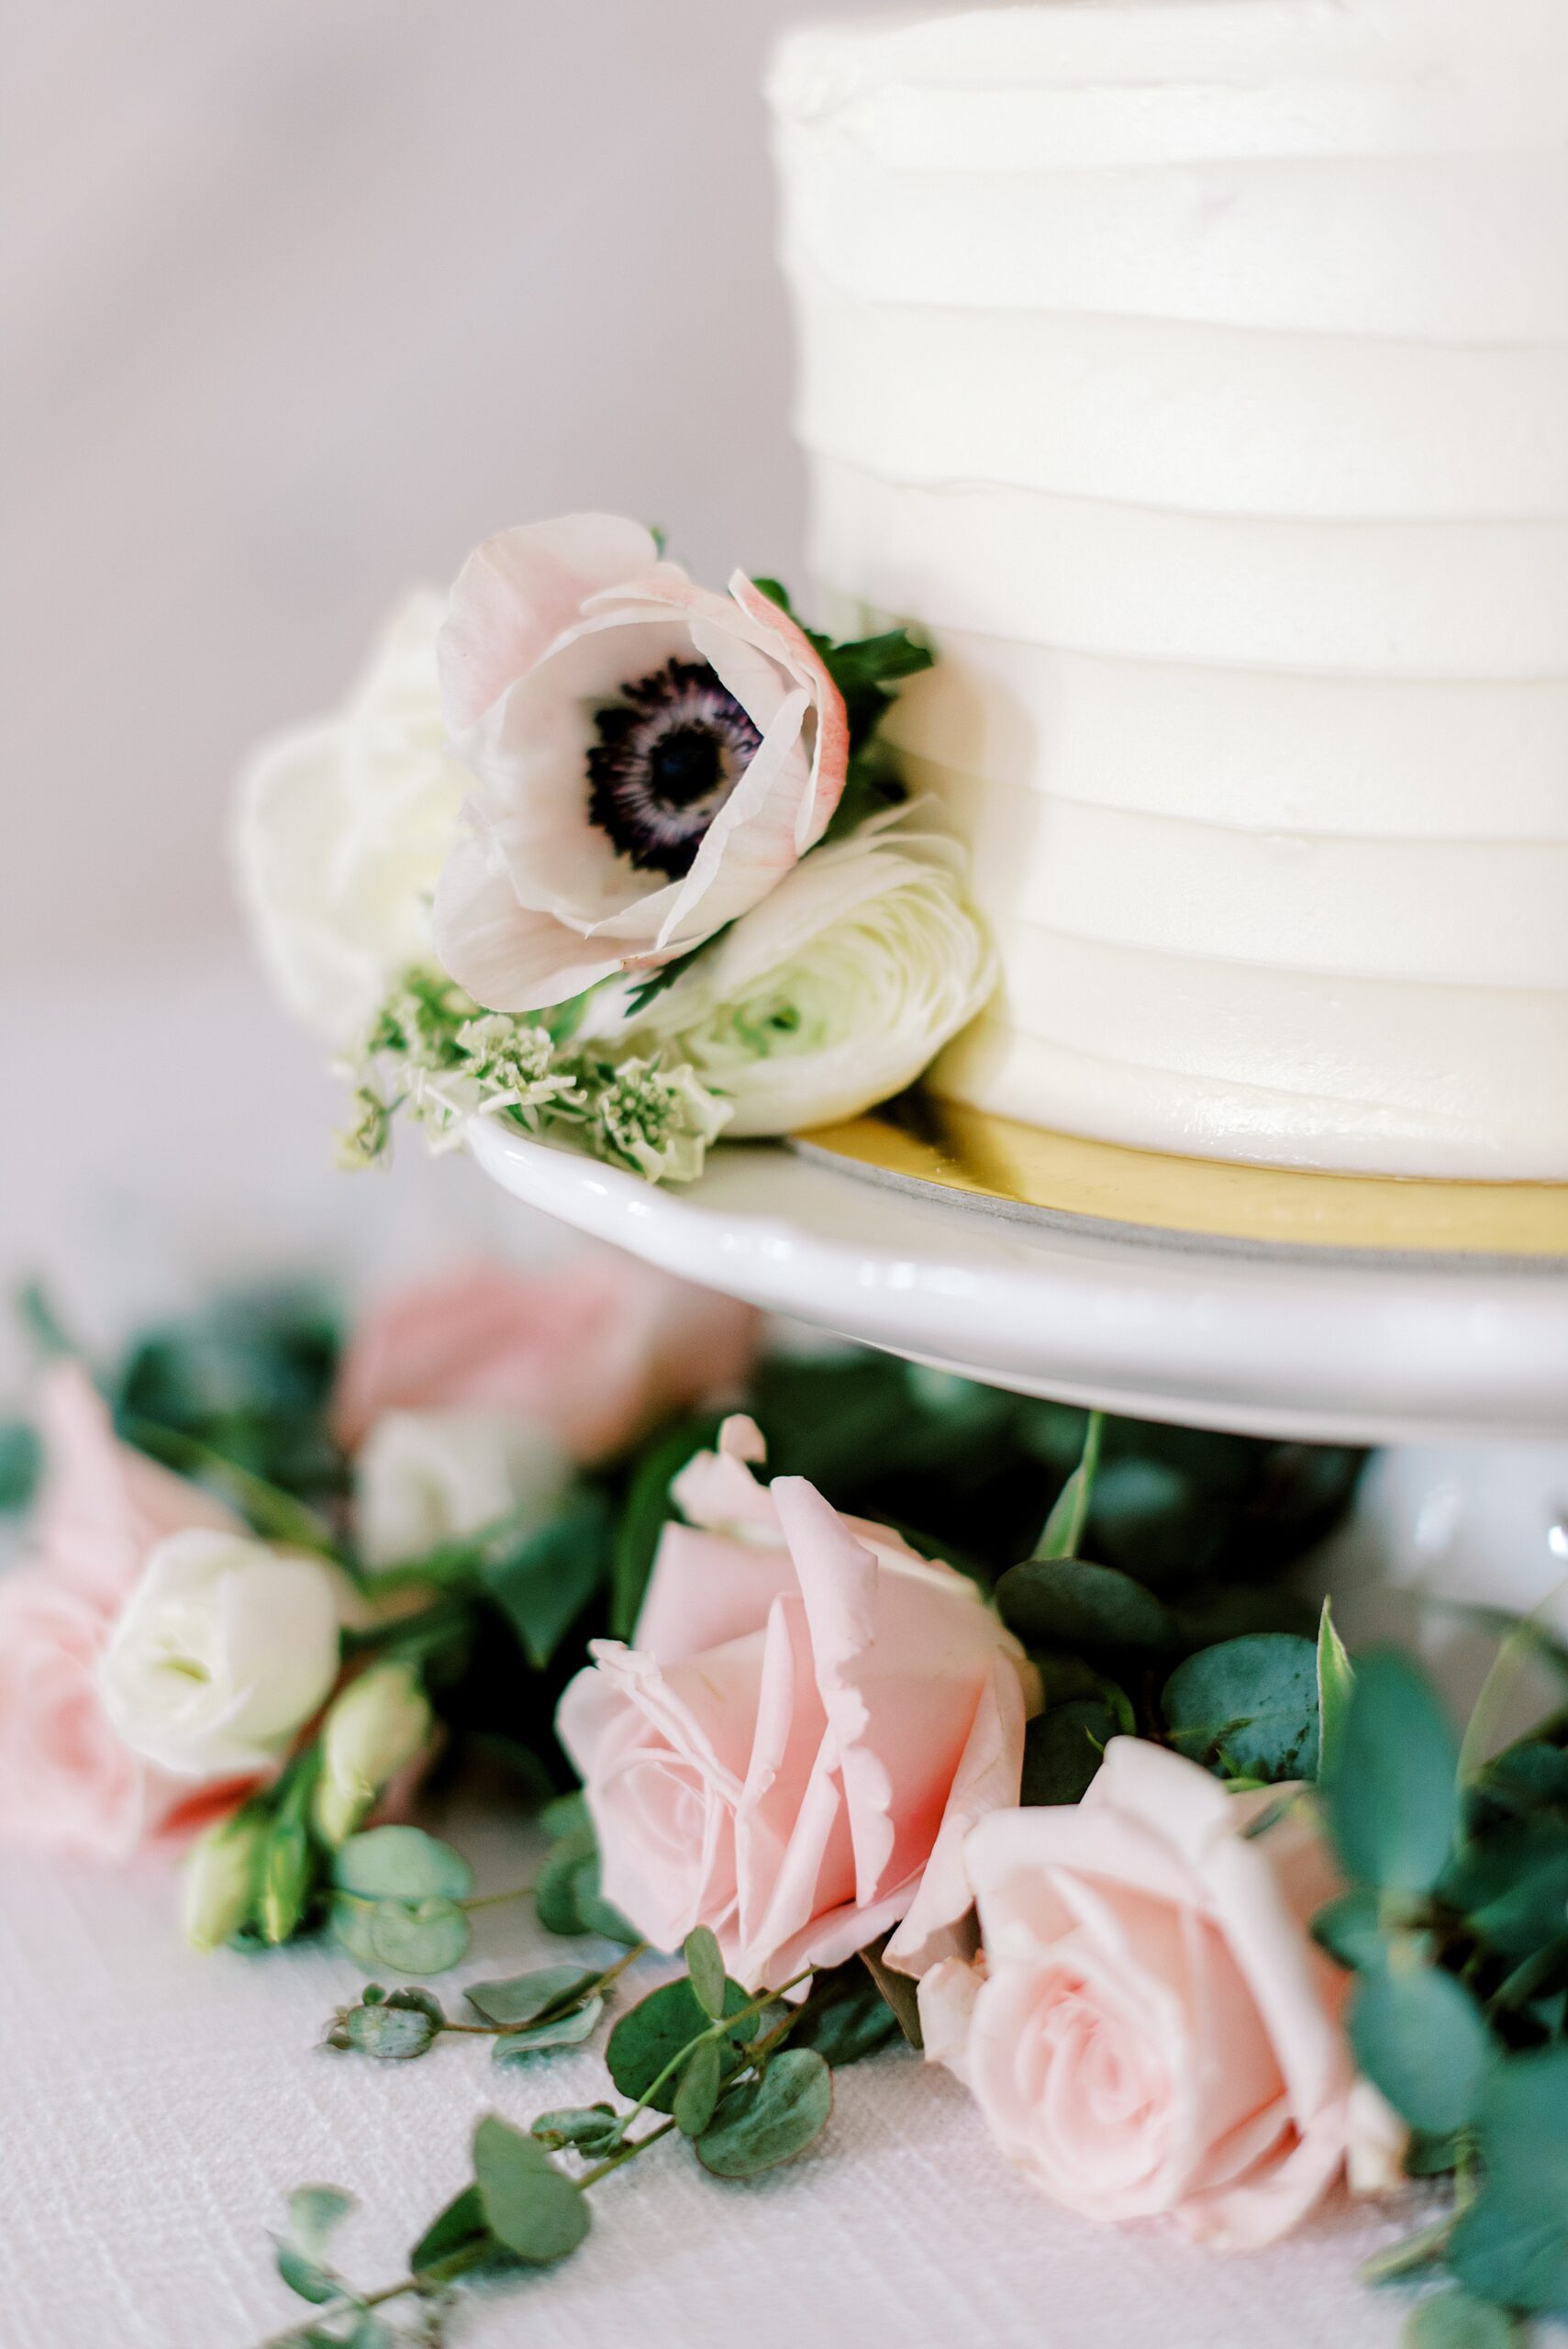 Details of flowers on a white wedding cake